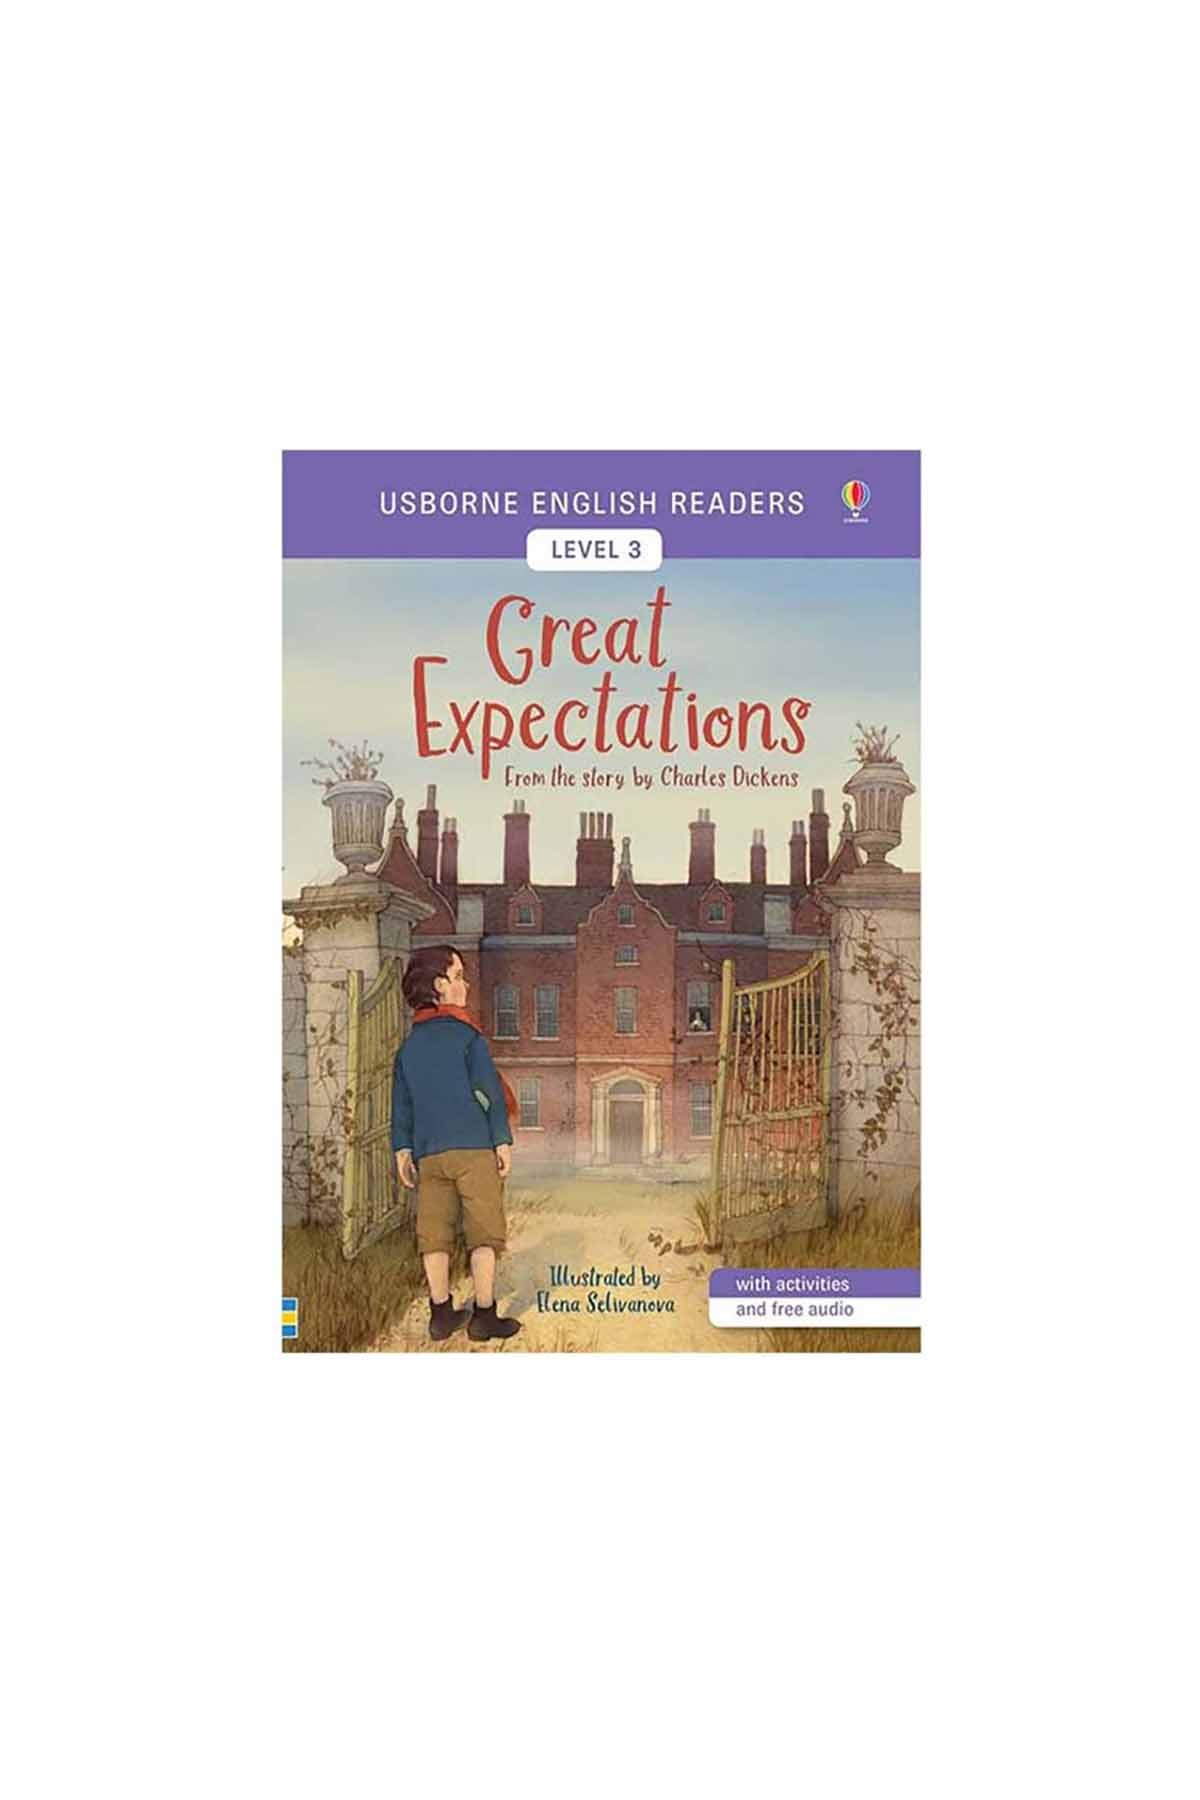 The Usborne Great Expectations